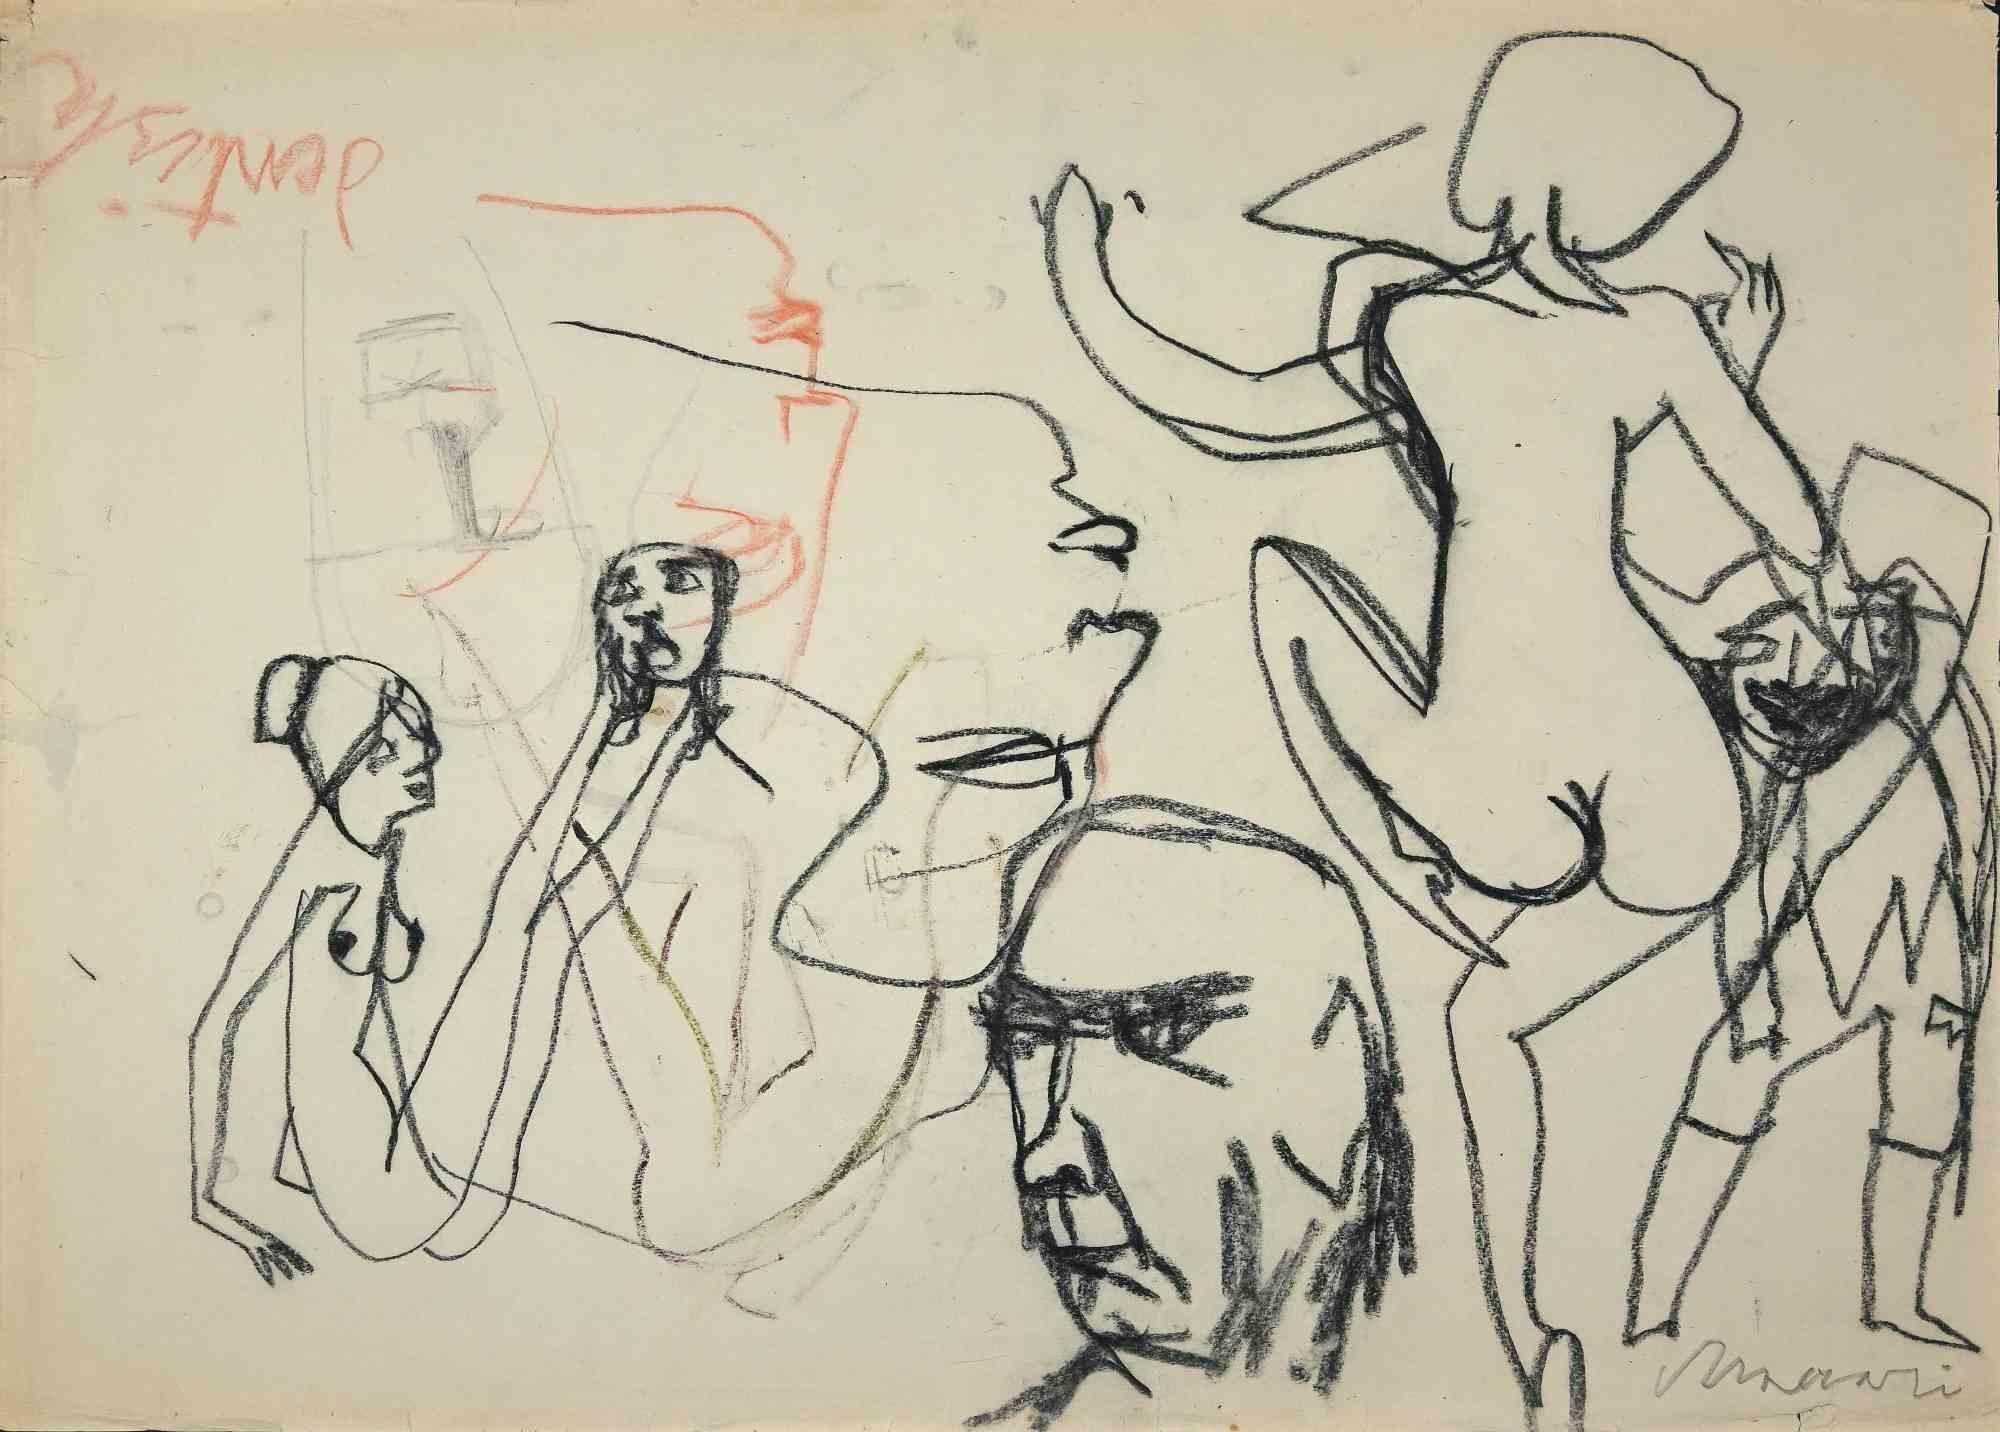 The Nudes is a Drawing in carbon on creamy-colored paper realized by Mino Maccari in the mid-20th century.

Hand-signed by the artist on the lower.

Good conditions with some foxing and cutting on the margins.

Mino Maccari (1898-1989) was an